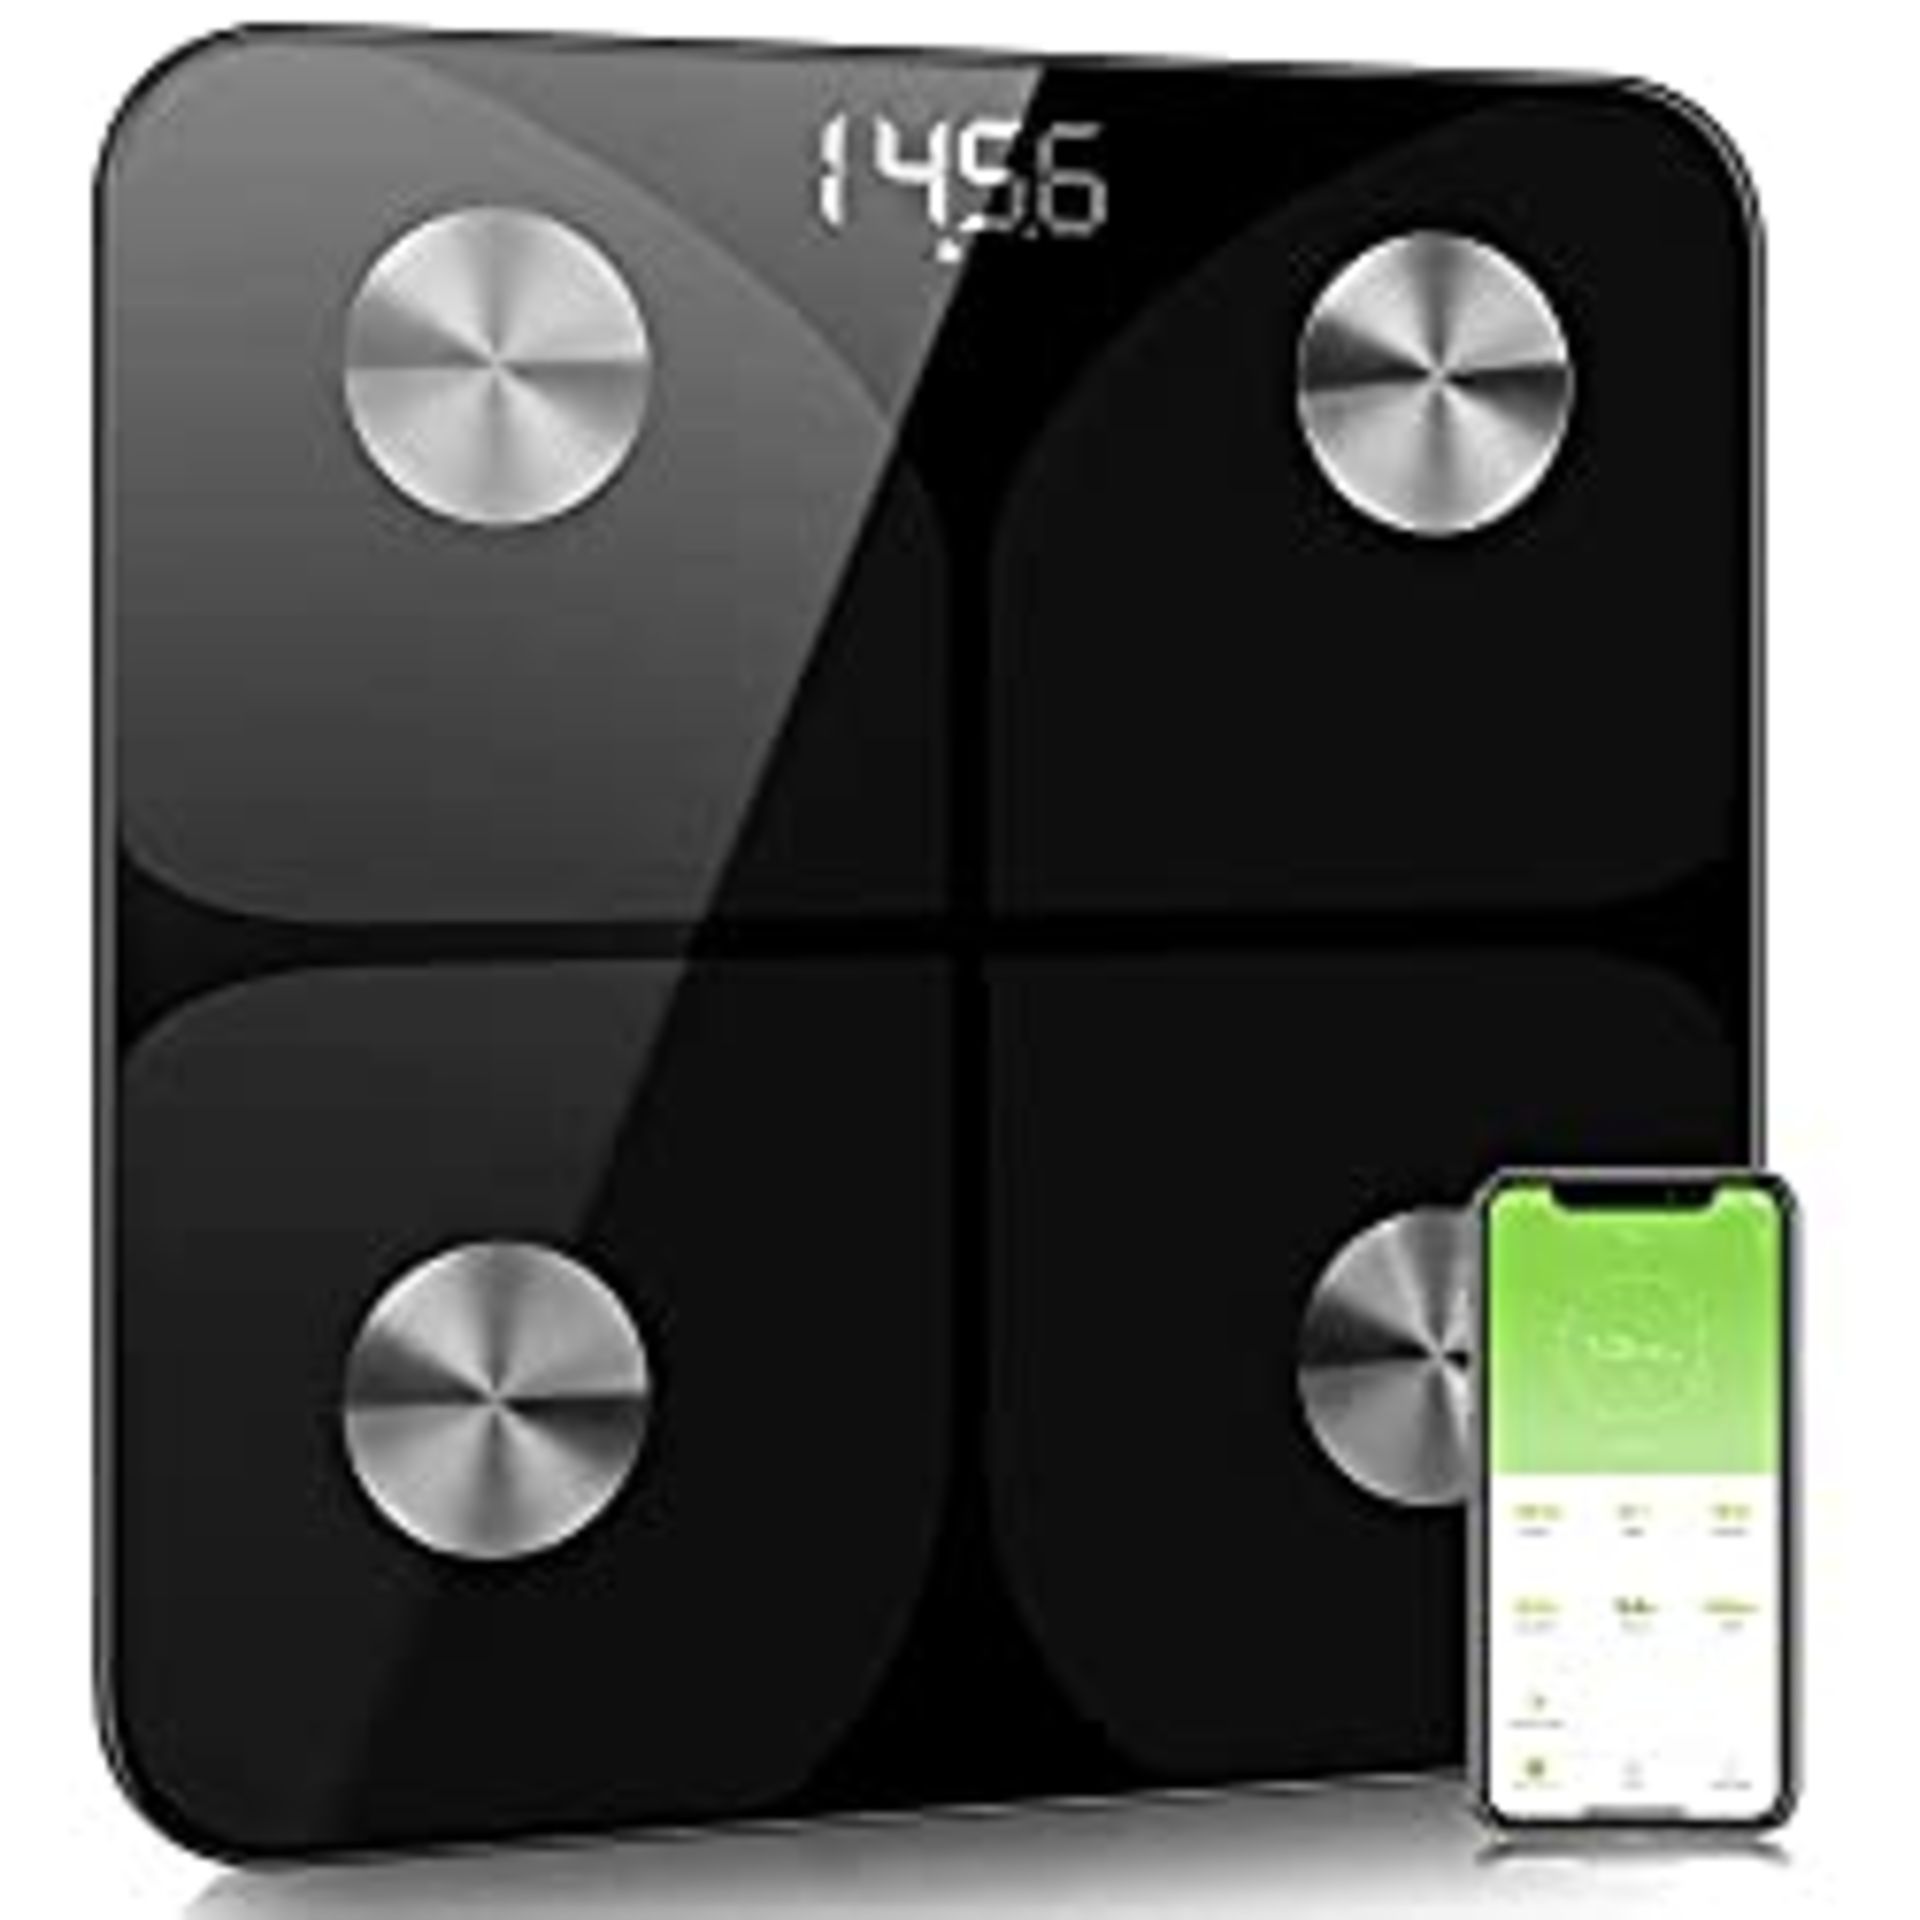 RRP £22.20 Scales for Body Weight - Smart Body Fat Scales Composition Analyzer Monitor